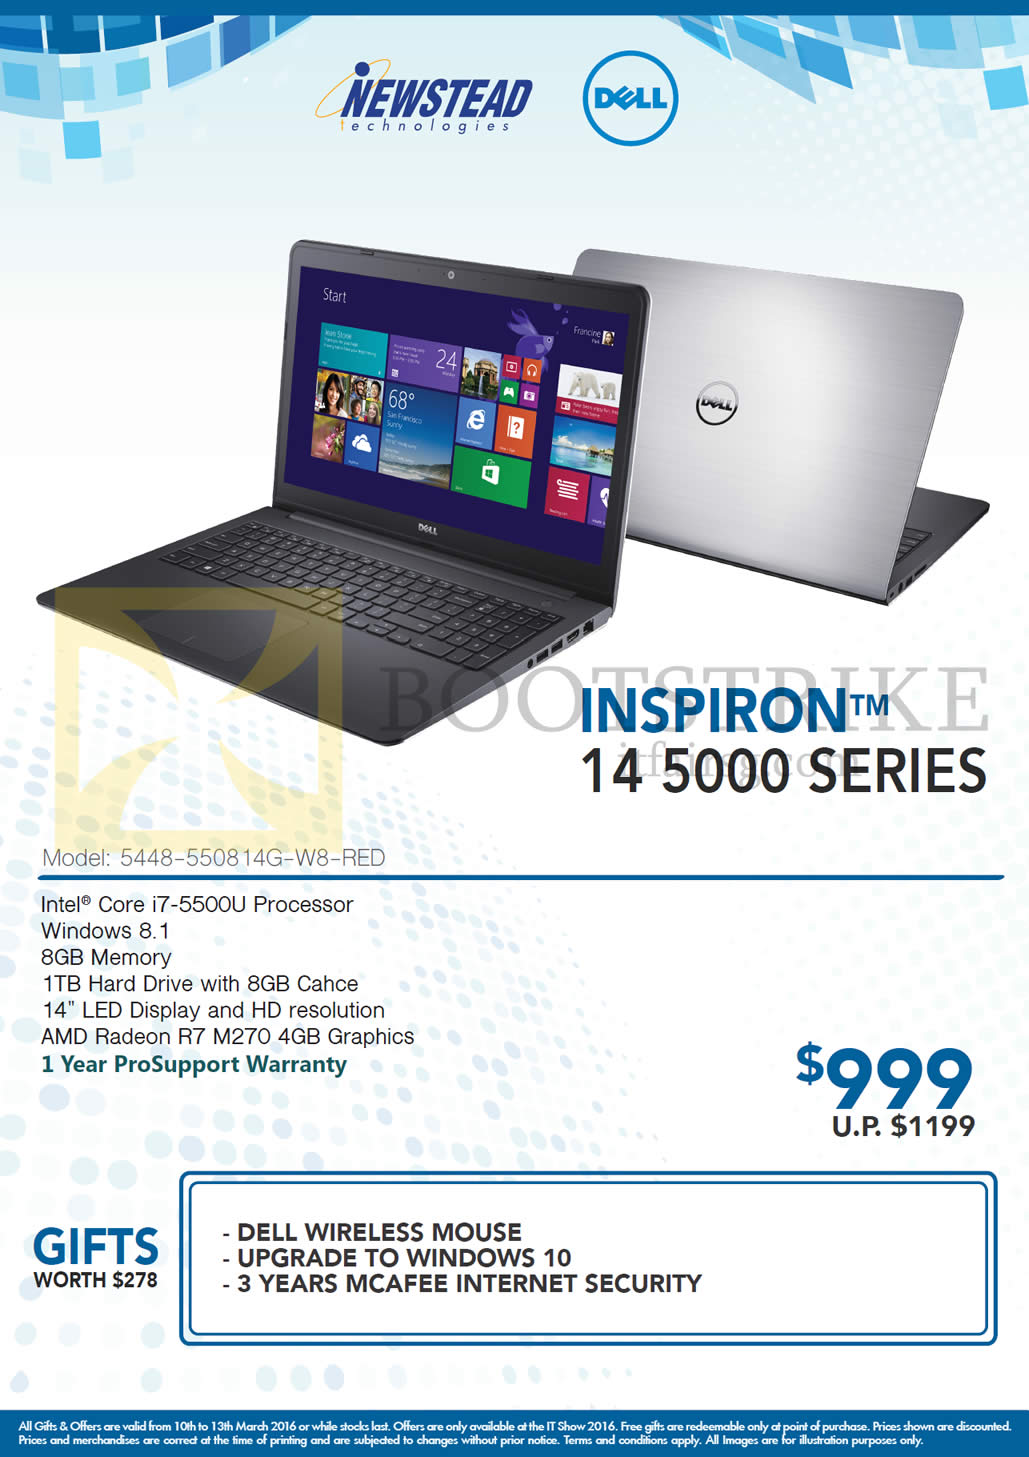 IT SHOW 2016 price list image brochure of Dell Newstead Notebook Inspiron 14 5000 Series